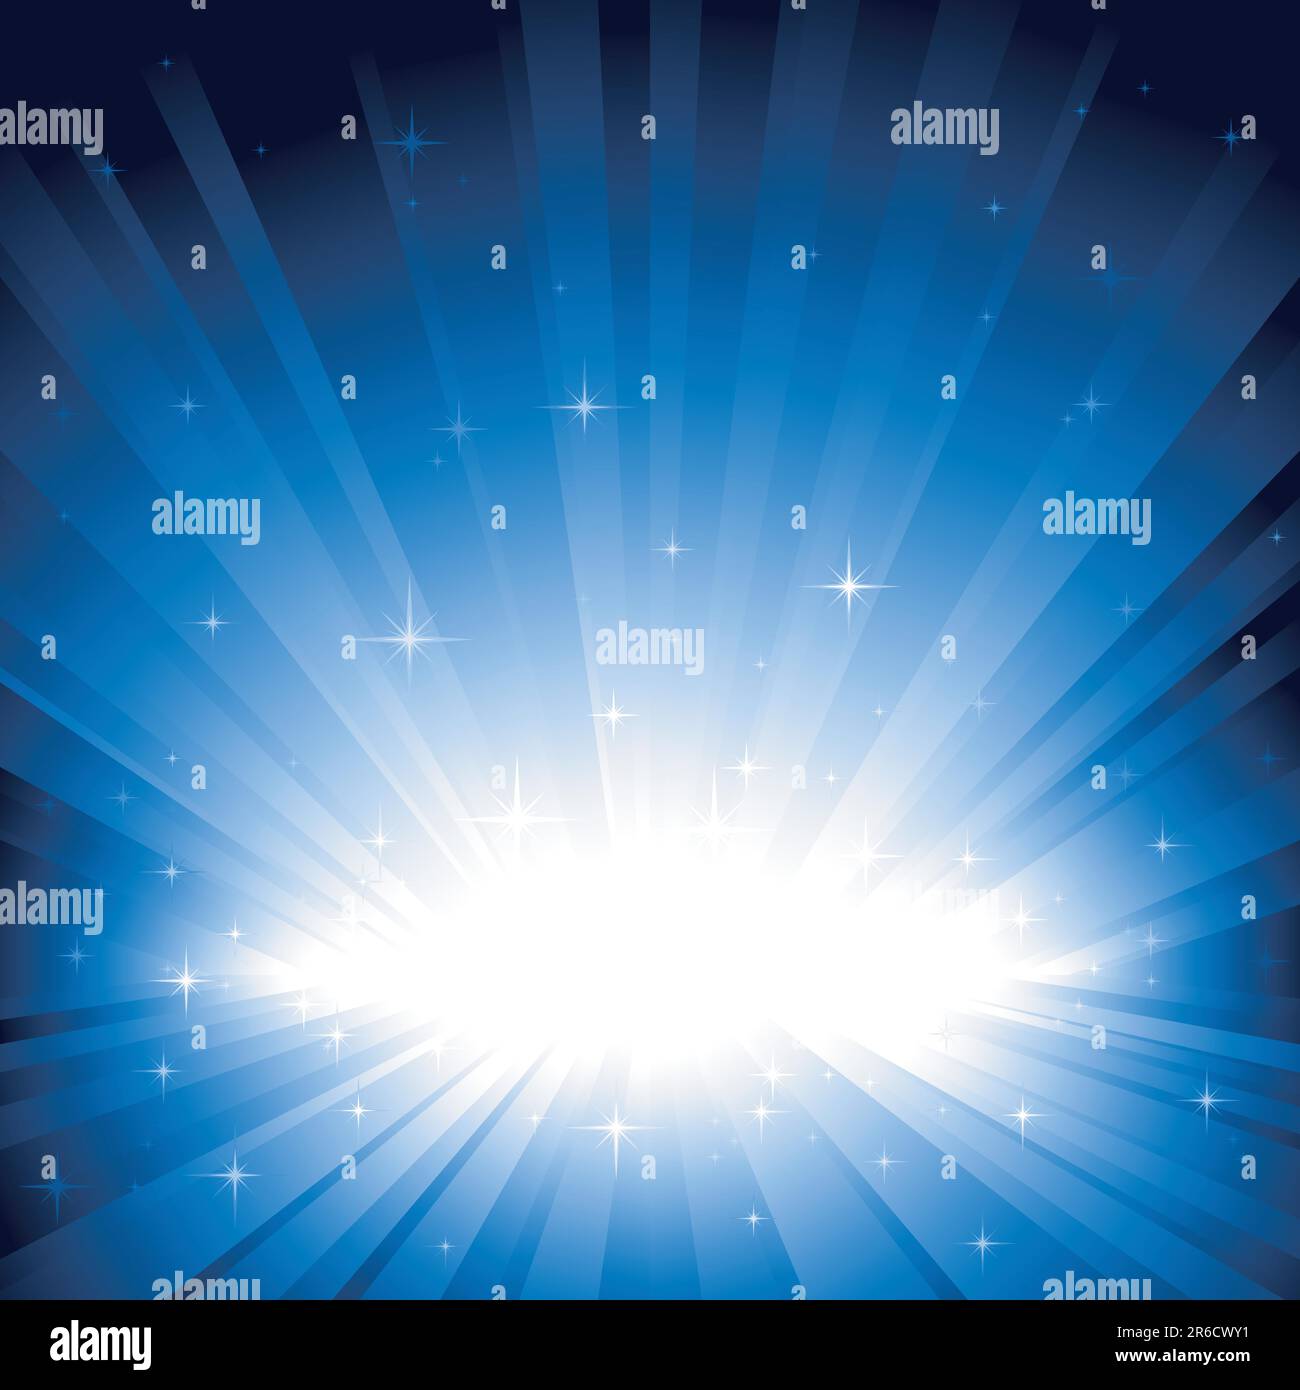 Festive blue light burst and stars with centre in lower third of the square image. 9 global colors, background controlled by 1 linear gradient. Stock Vector